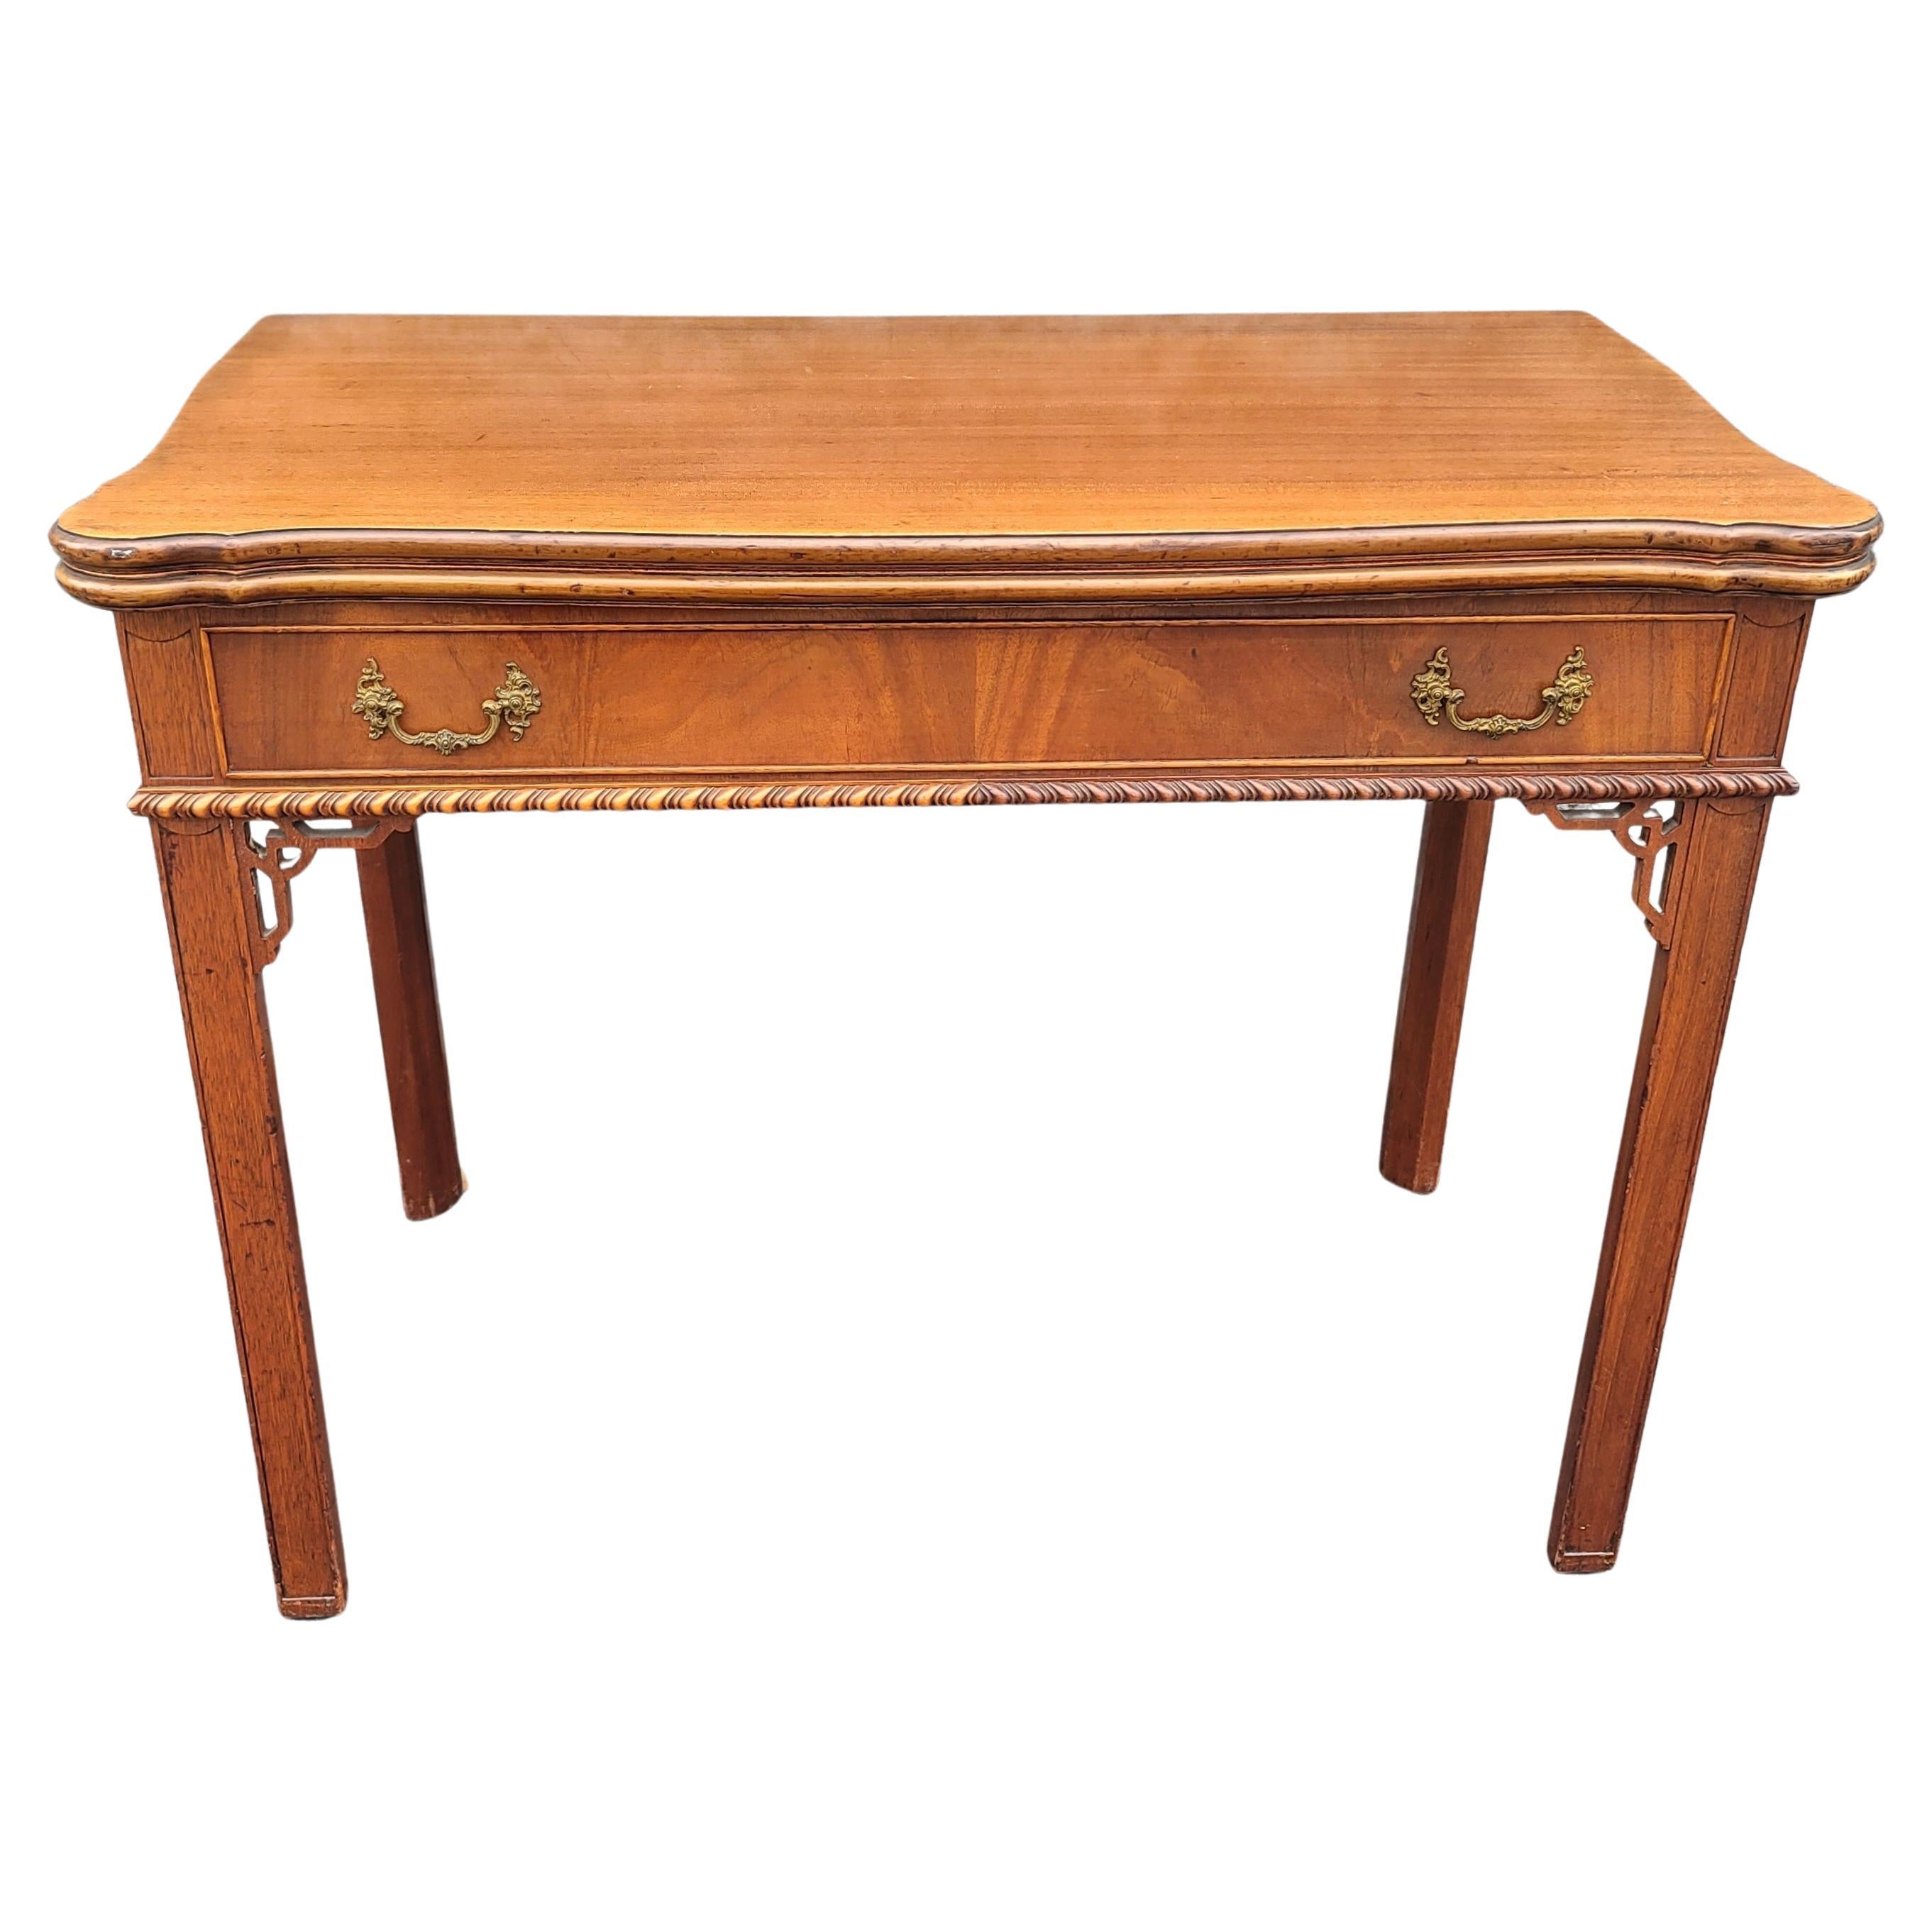 1960s George III style Mahogany extension console table or dining table with three leaves.
Measures 39